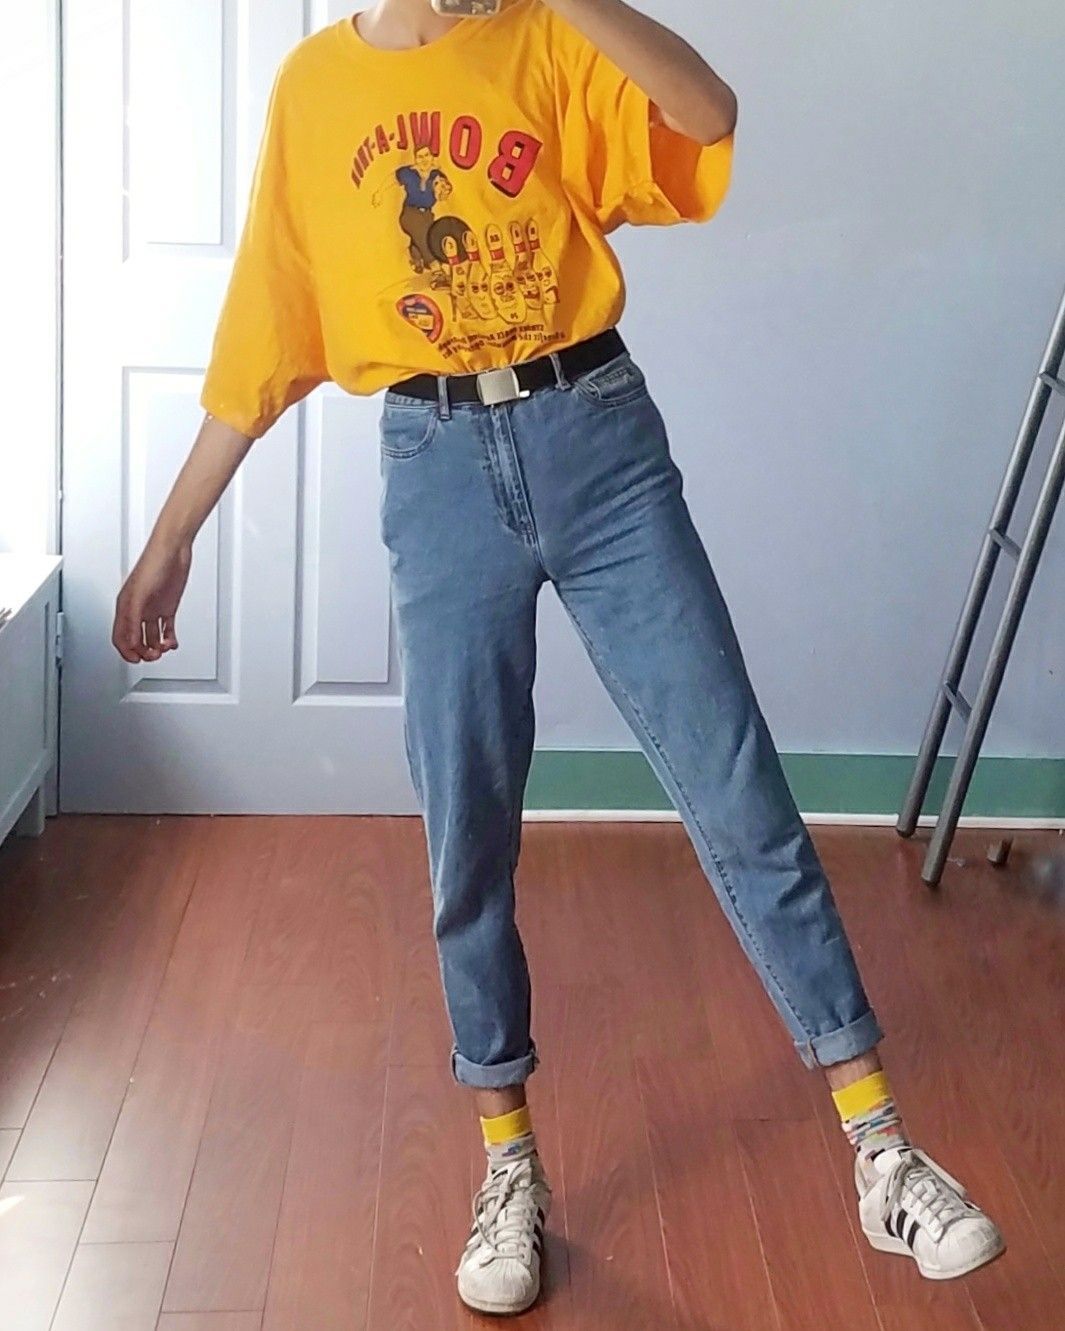 90s Aesthetic Clothes Pinterest